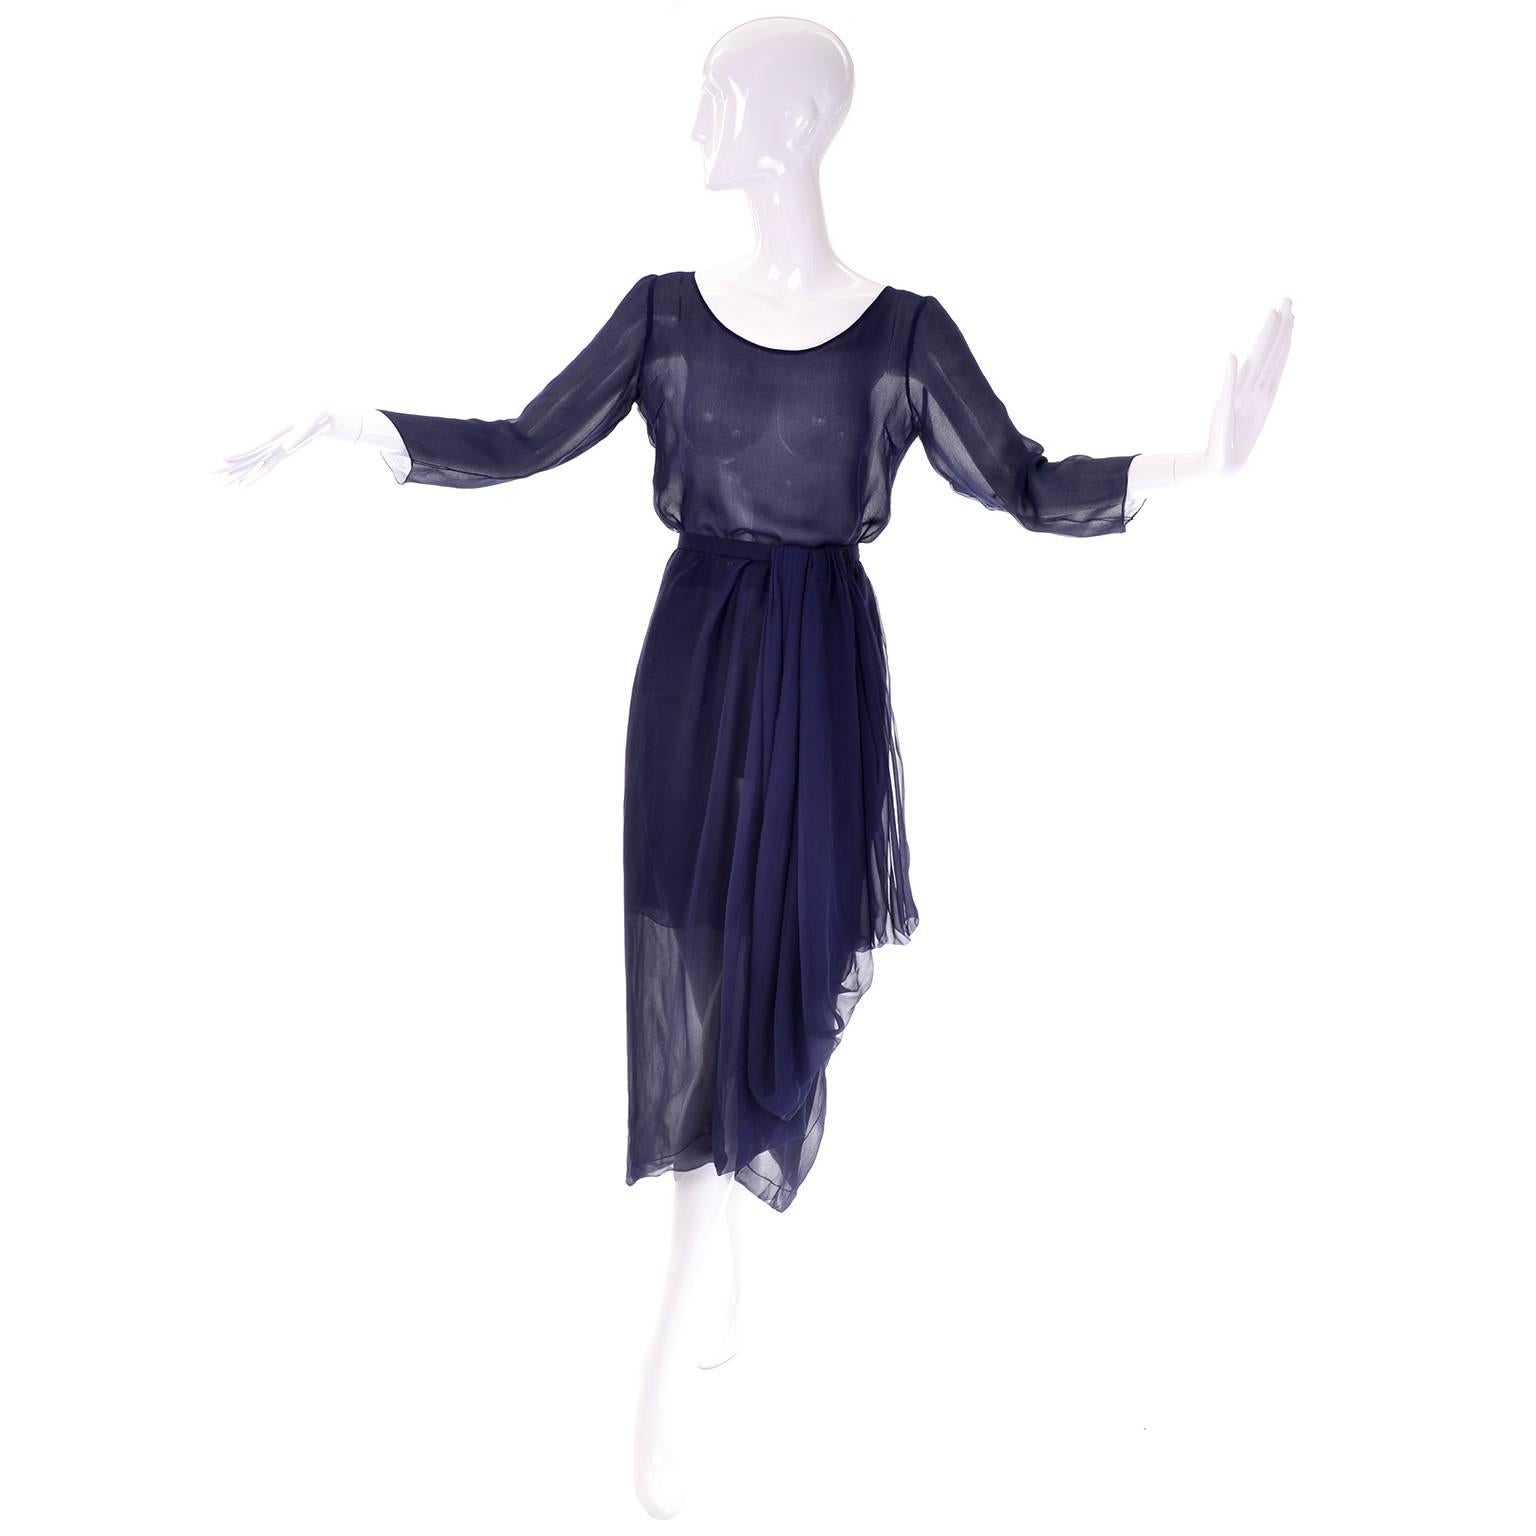 This is an exquisite vintage 2 piece 100% silk chiffon navy blue haute couture evening dress from Christian Dior Paris. This incredible ensemble includes a tunic style blouse and a beautiful draped asymmetric skirt. When worn together, this 2pc